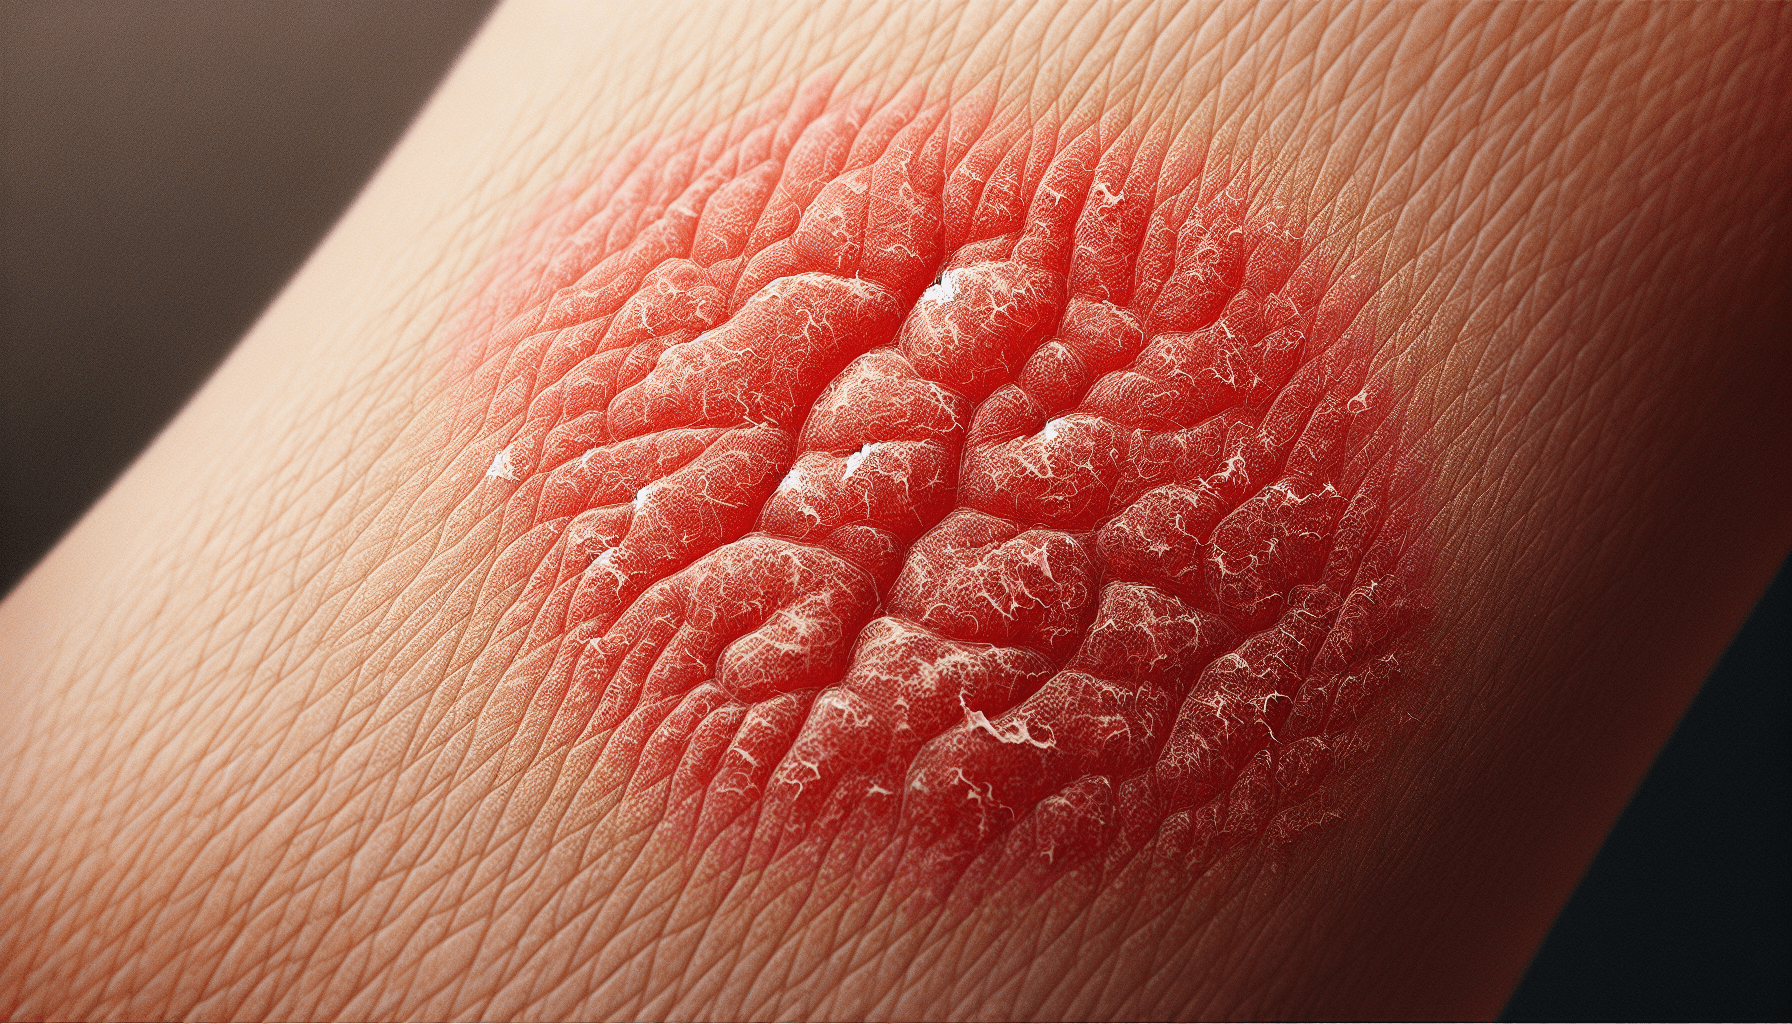 What Does Early Signs Of Eczema Look Like?